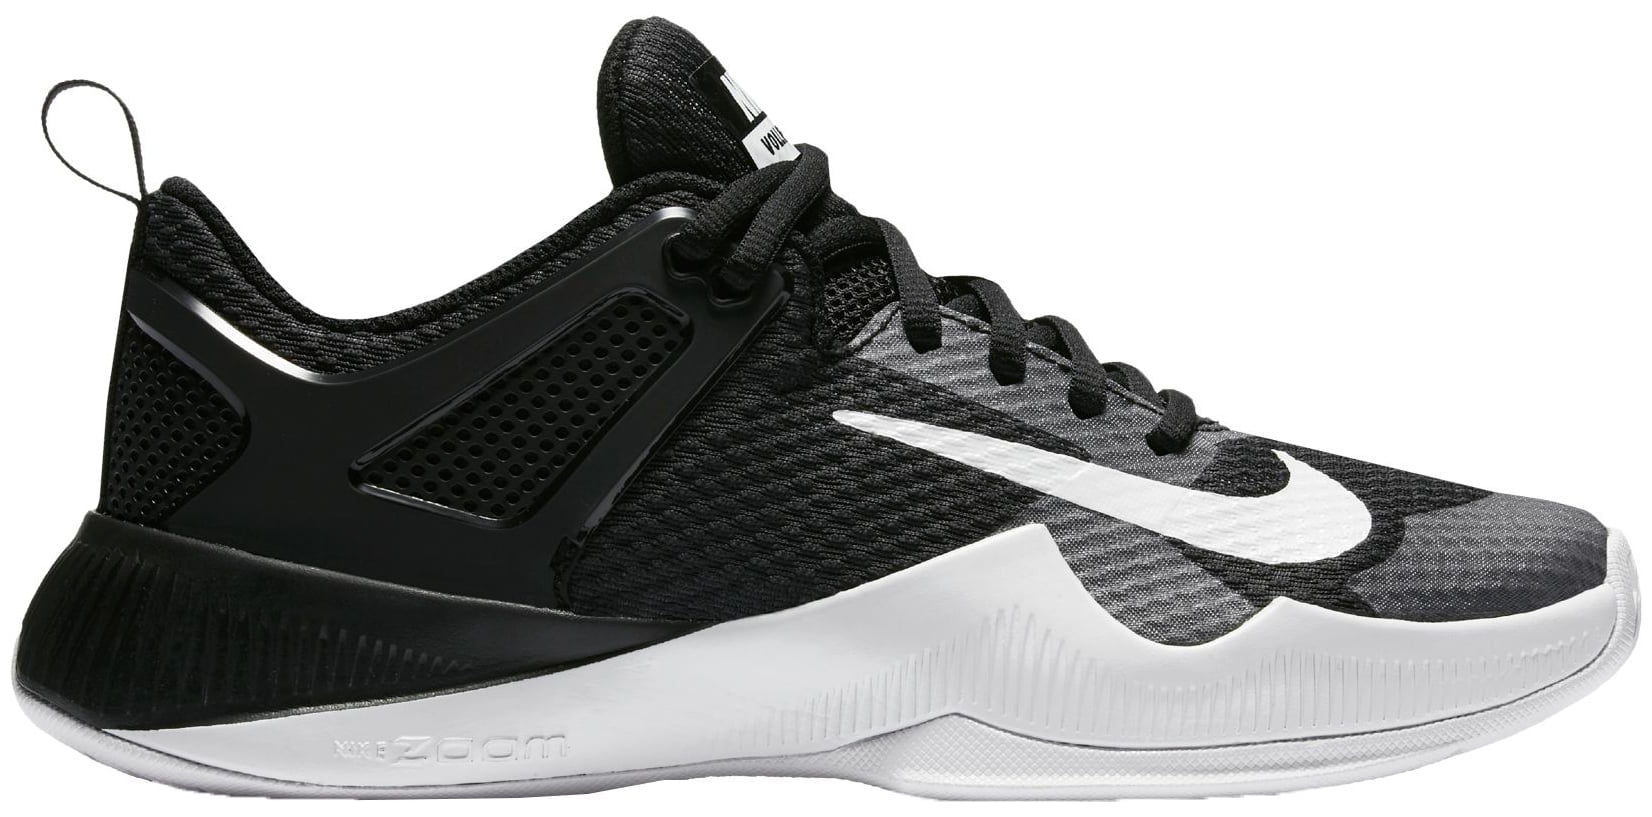 Nike Women's Air Zoom HyperAce Volleyball Shoes (Black/White, 7.5)